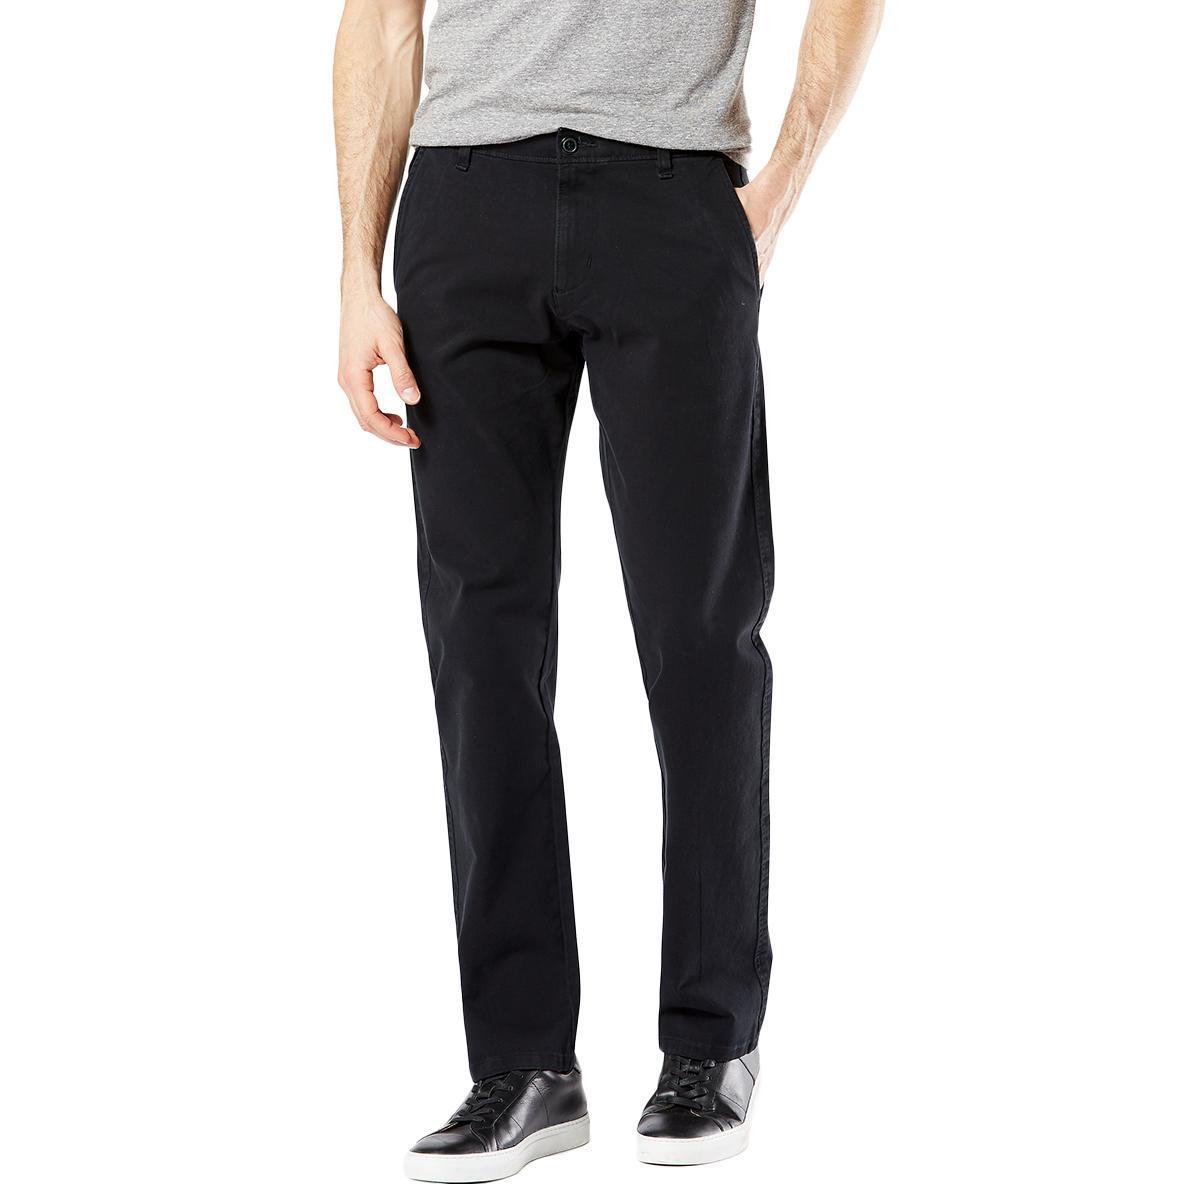 Dockers Mens Ultimate Chino Pants Product Image